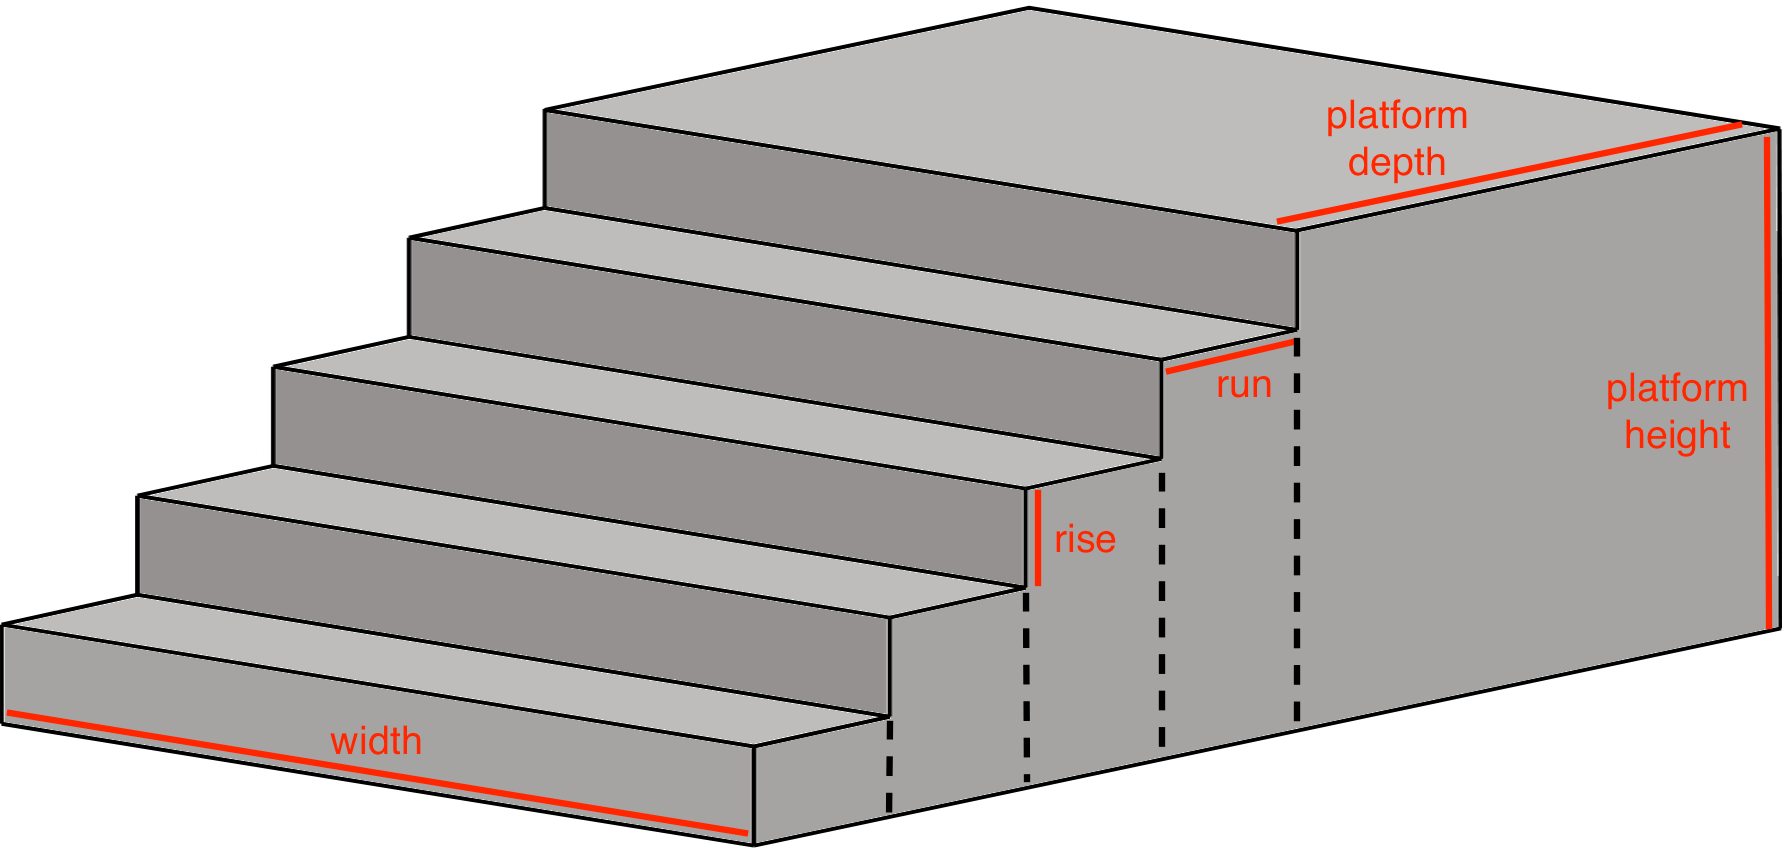 Illustration showing how to break up the steps into smaller rectangles for estimation